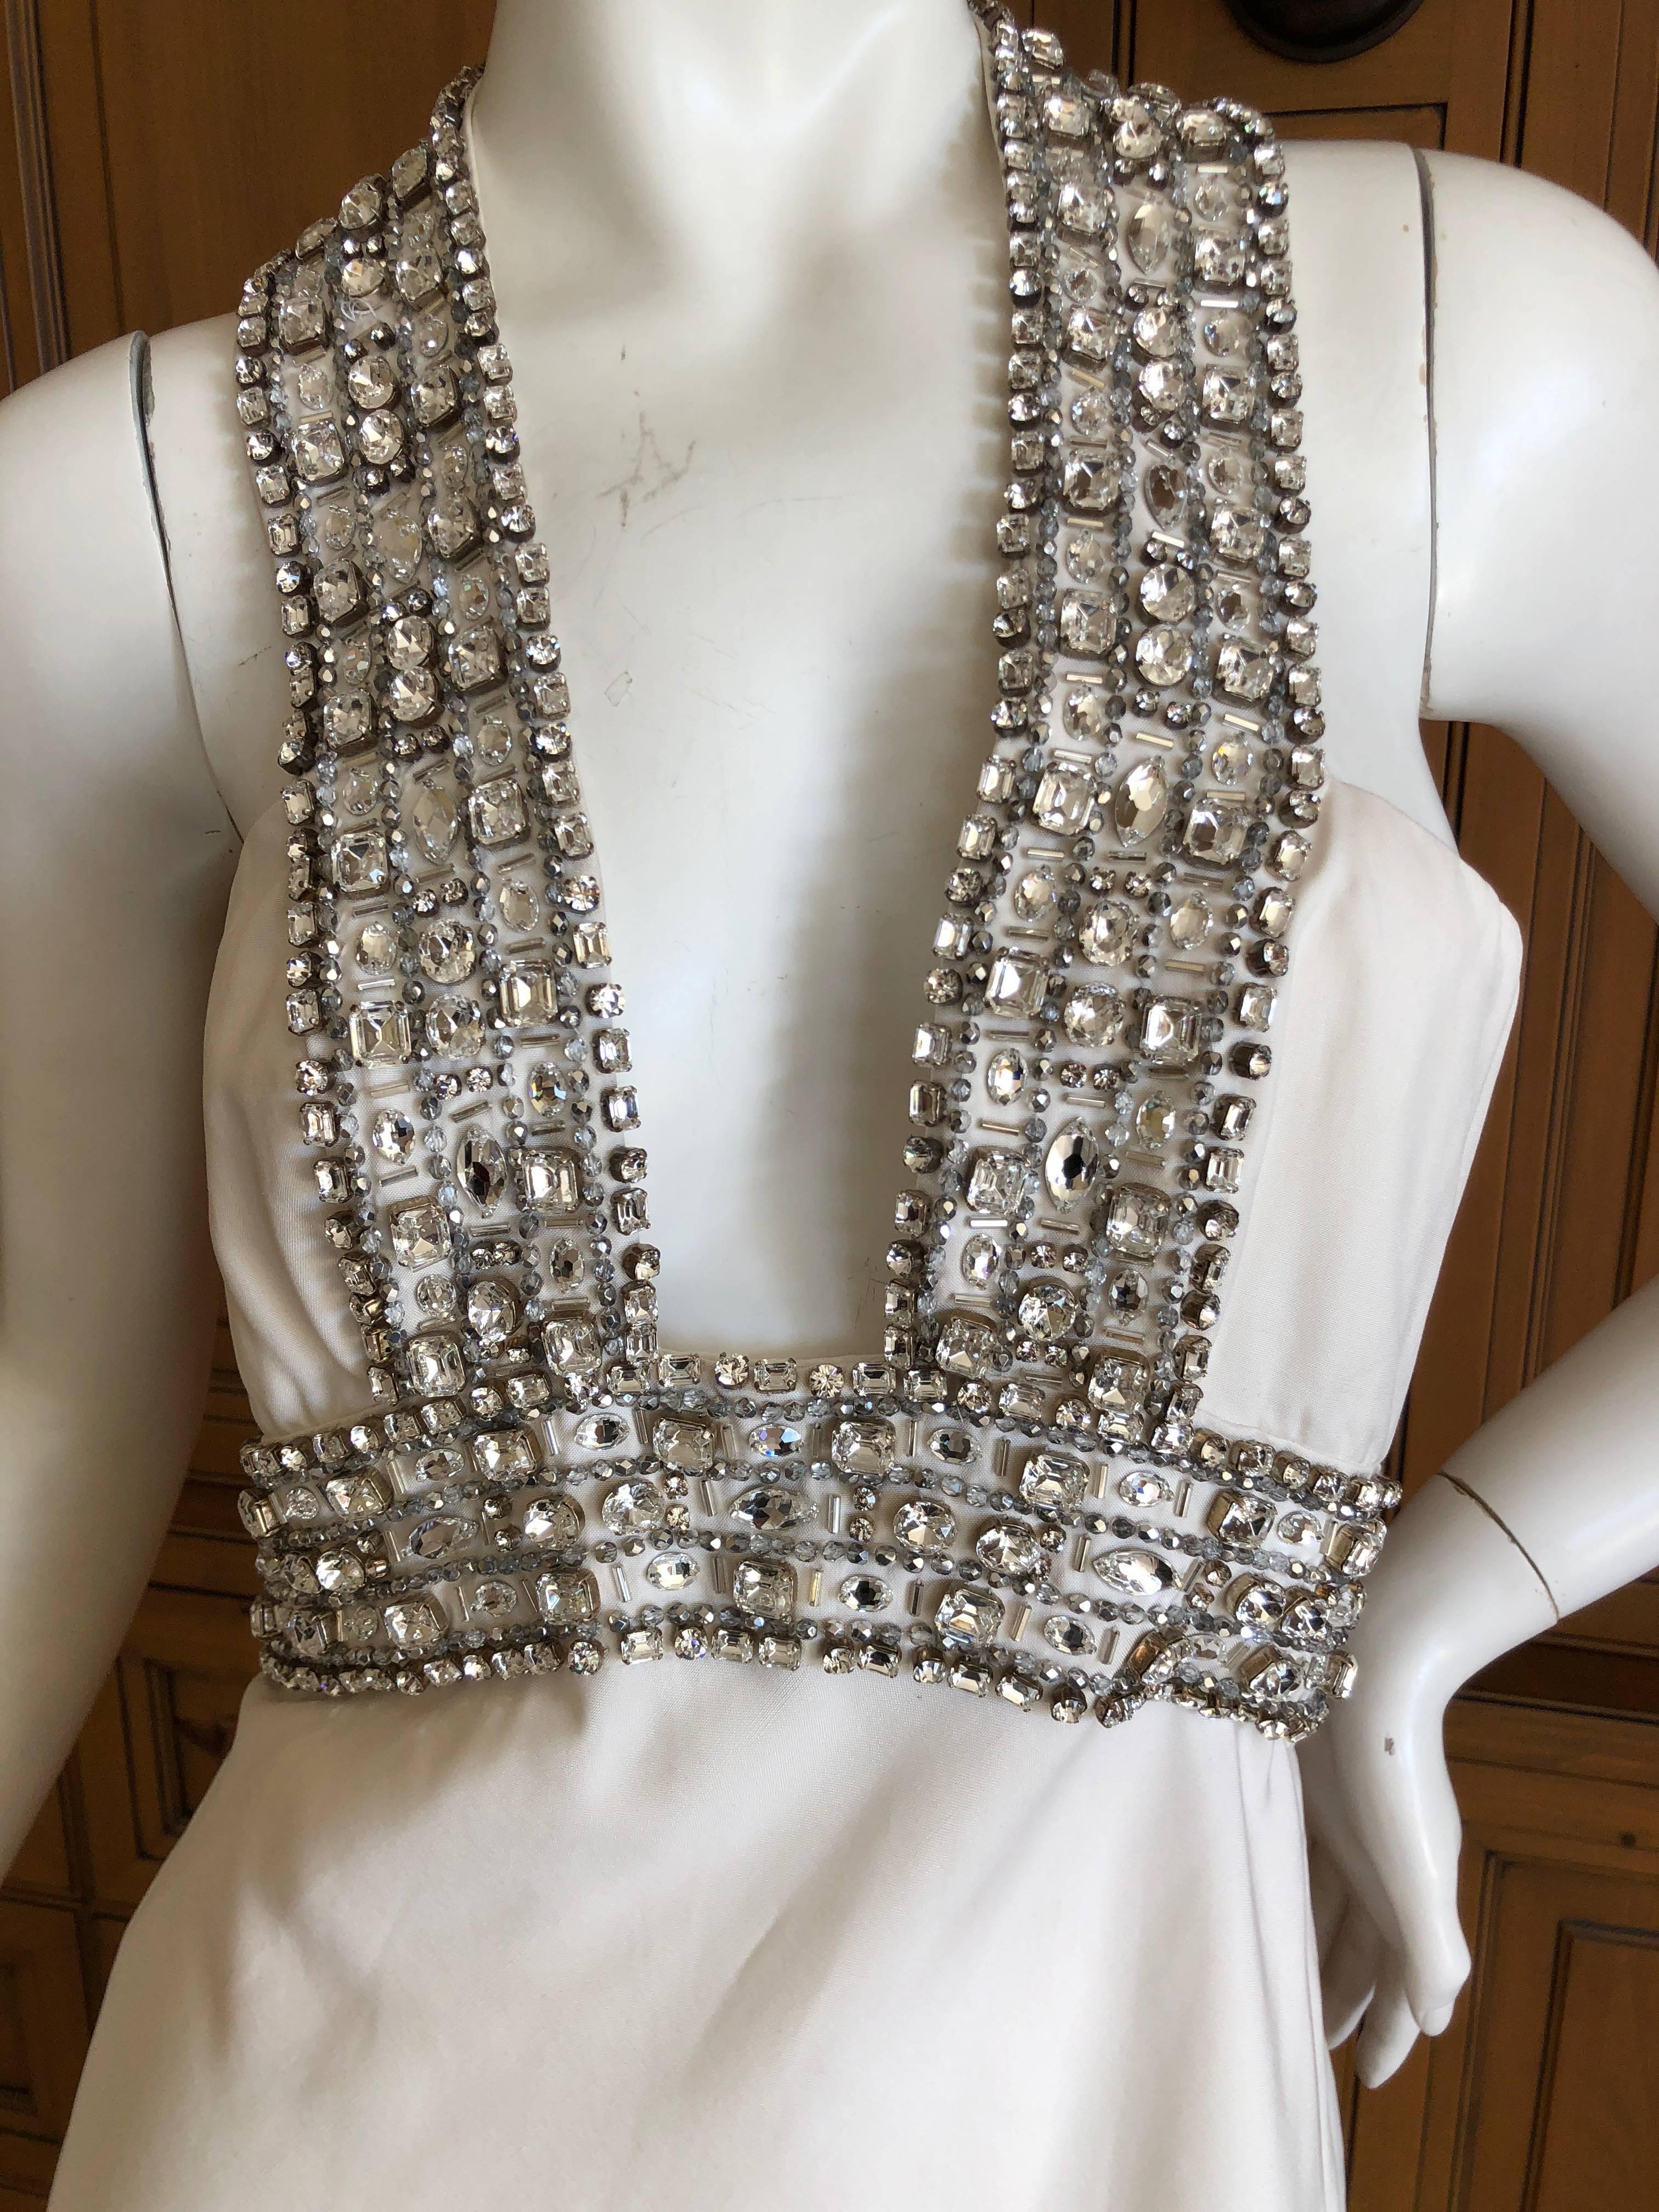 Azzaro Low Cut Ivory Dress with Bold Crystal Jewel Details In Excellent Condition For Sale In Cloverdale, CA